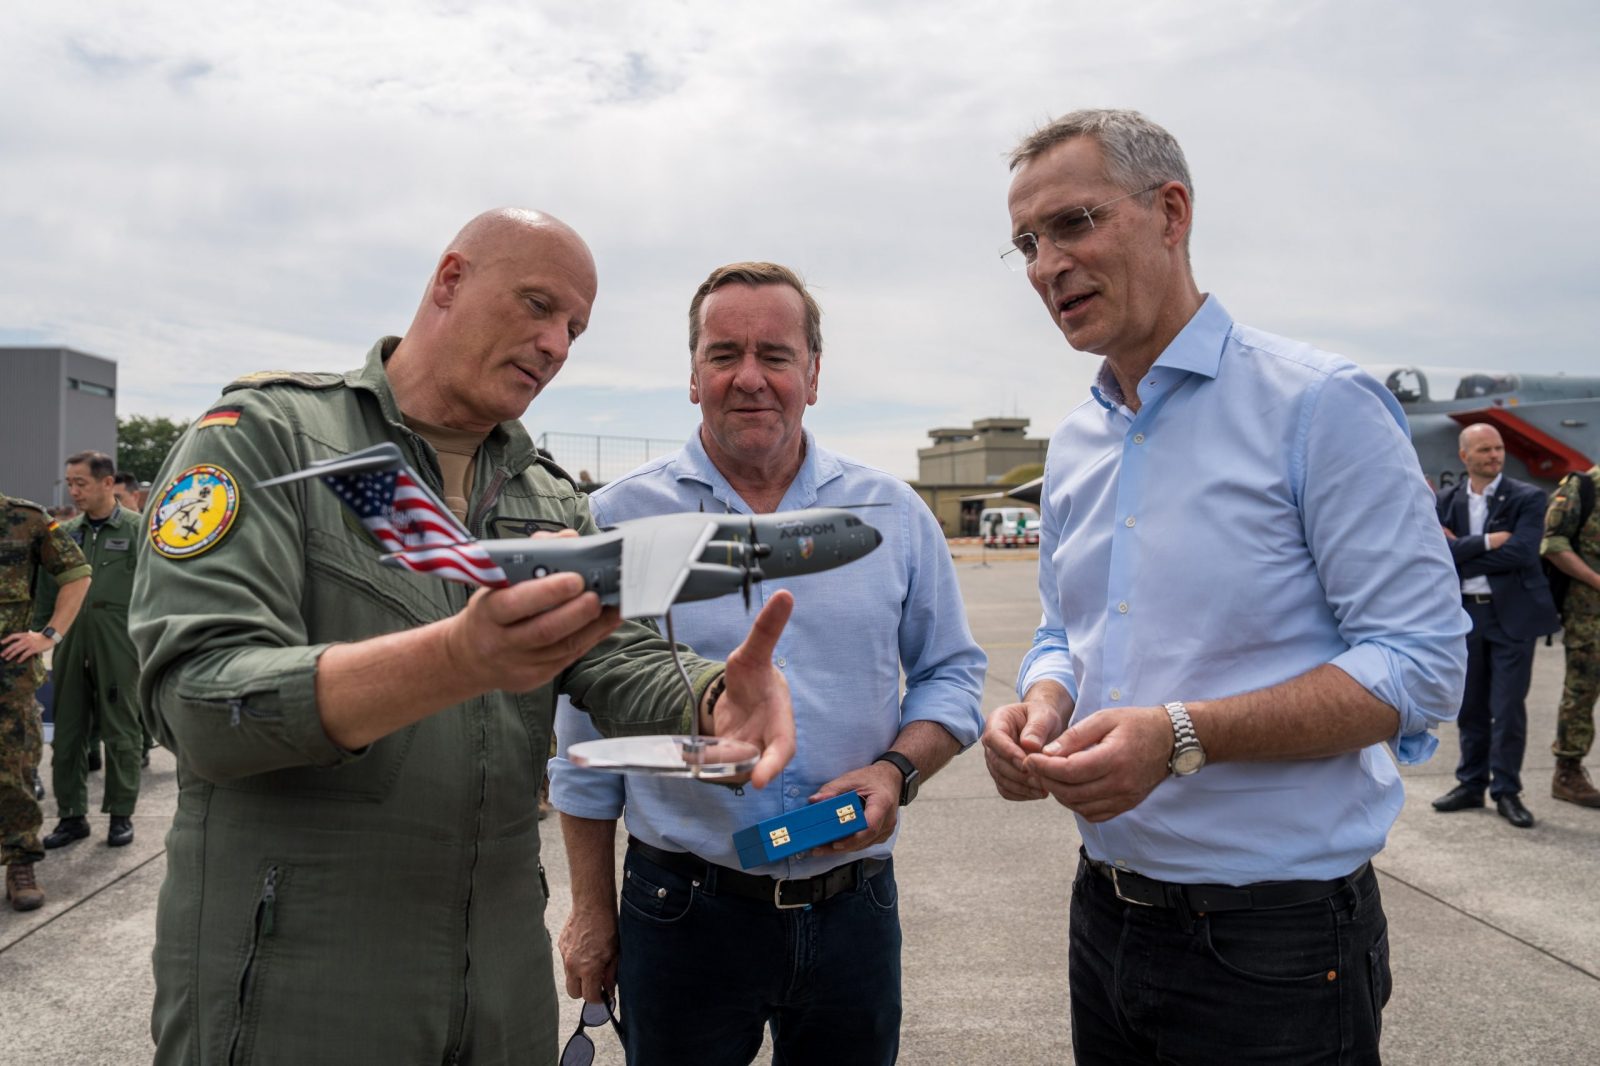 epa10701432 NATO Secretary General Jens Stoltenberg (R) receives a scale model of an Airbus A400M military cargo plane from Chief of Staff of the German Air Force Lieutenant General Ingo Gerhartz (L), standing next to German Defense Minister Boris Pistorius (C), during his visit of the NATO Air Defender 2023 exercise, in Jagel, Germany, 20 June 2023. The 'Air Defender 2023' maneuver is the largest North Atlantic Treaty Organization (NATO) redeployment exercise of air forces in its existence and takes place from 12 to 23 June gathering up to 10,000 participants from 25 nations with 250 aircraft to train air operations in European airspace under the command of the German Air Force, the German Armed Forces (Bundeswehr) explains on their website.  EPA/MARTIN ZIEMER / POOL